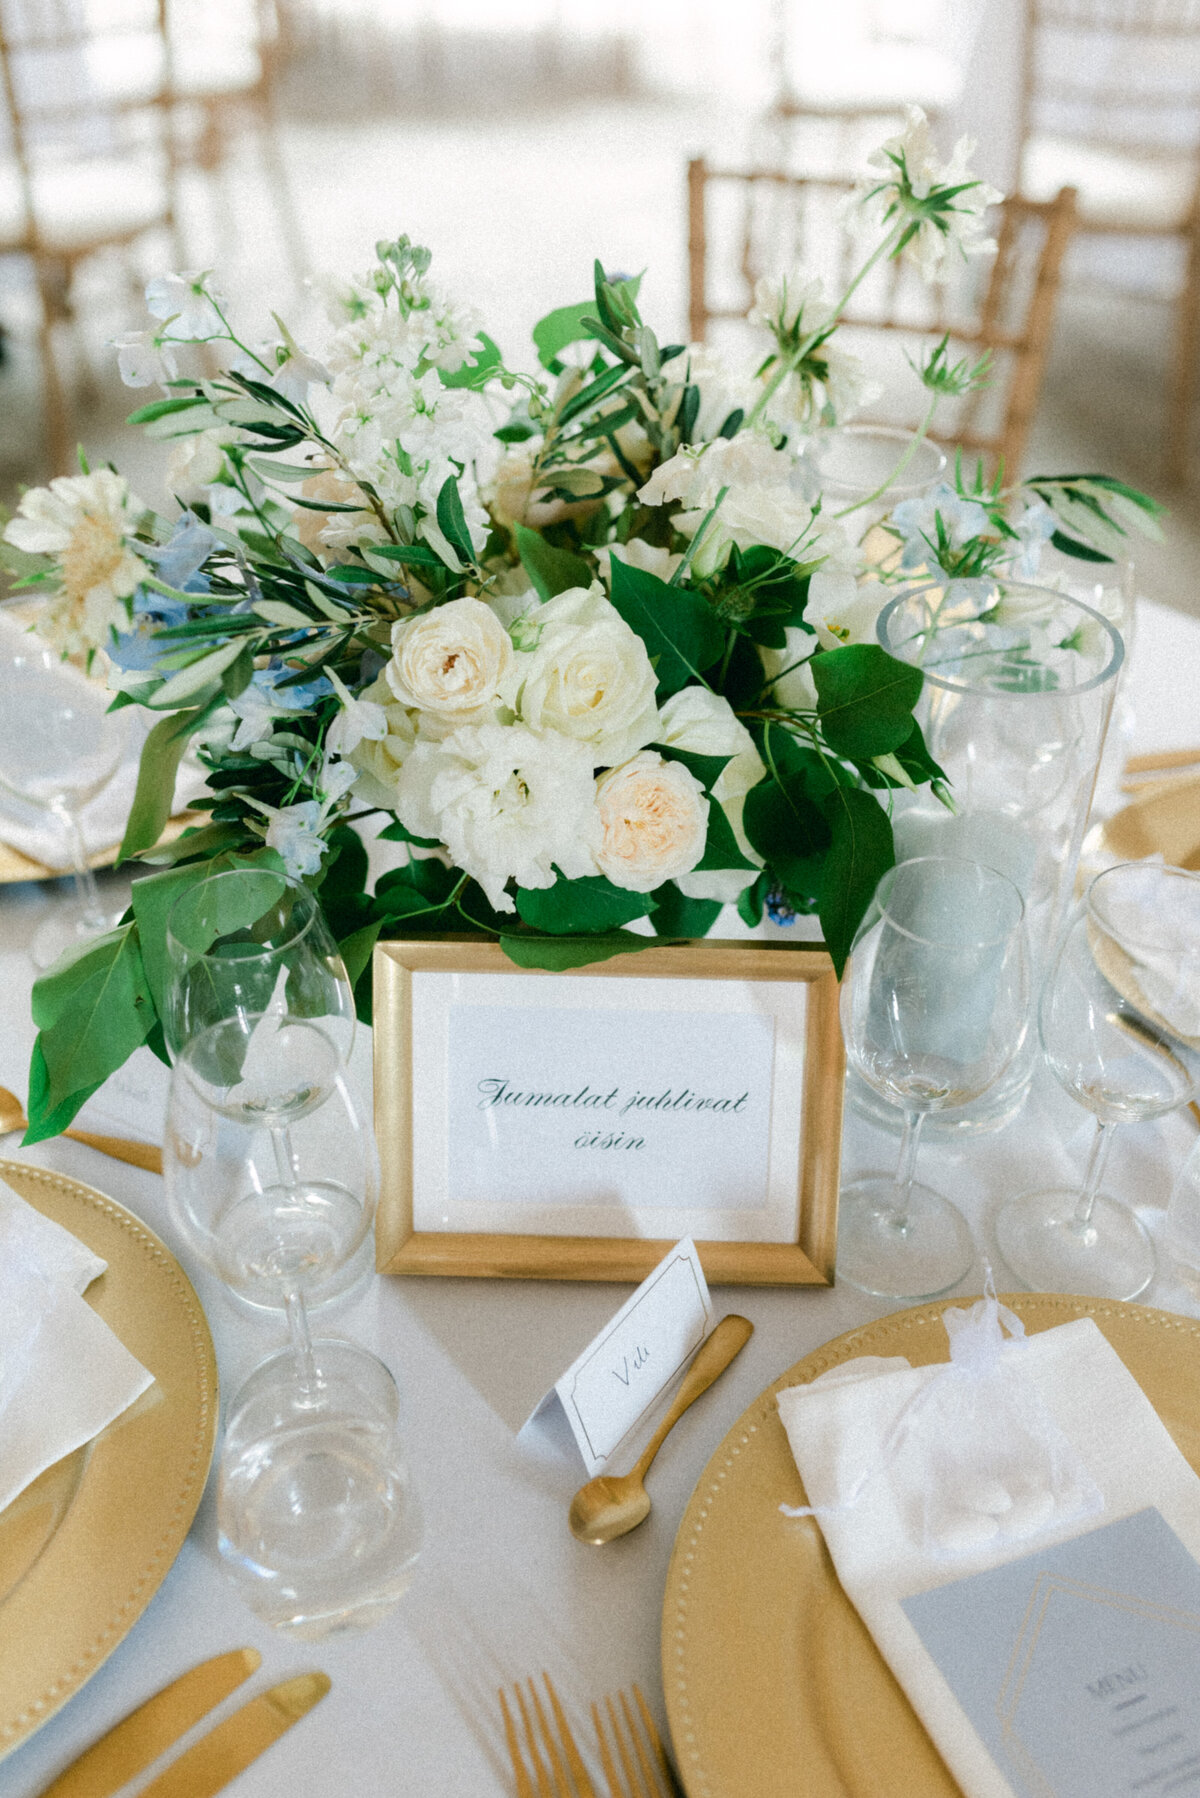 Wedding table setting and flowers photographed by wedding photographer Hannika Gabrielsson.